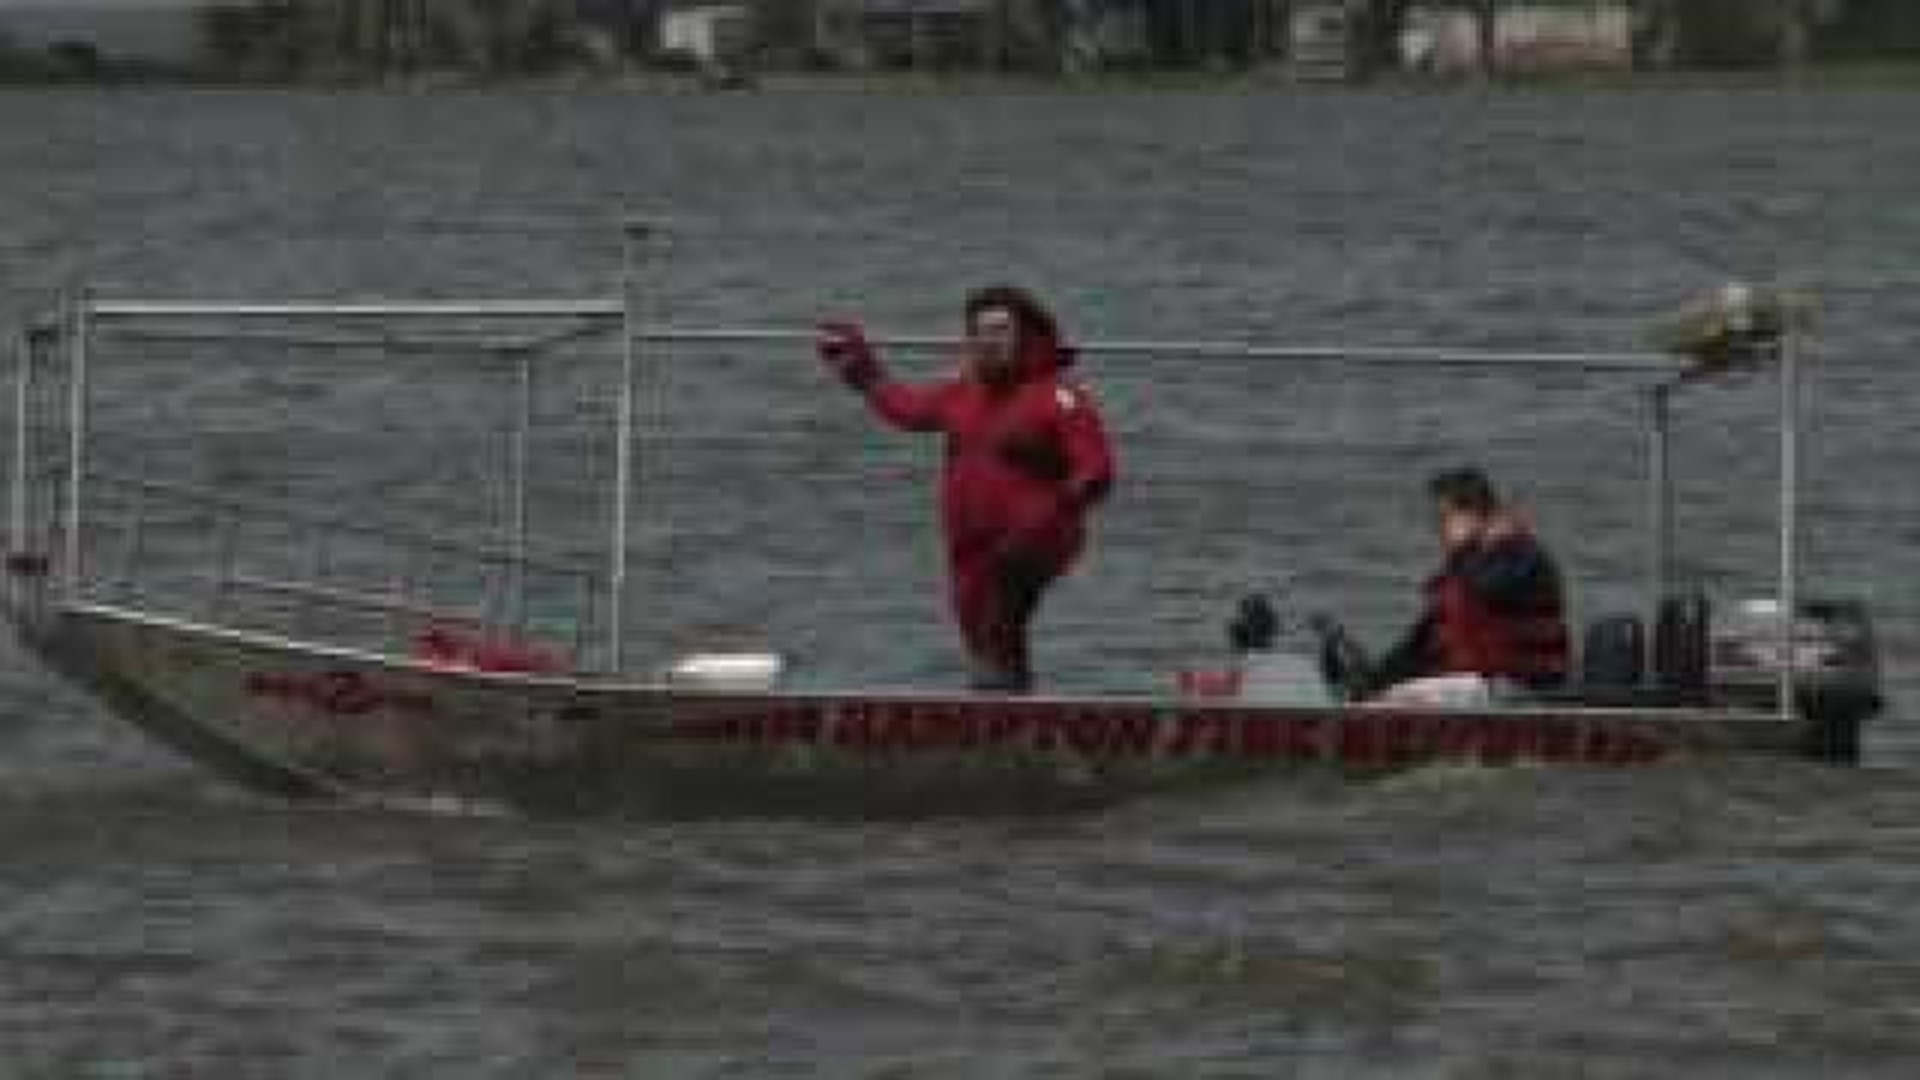 911 calls of boat rescue released